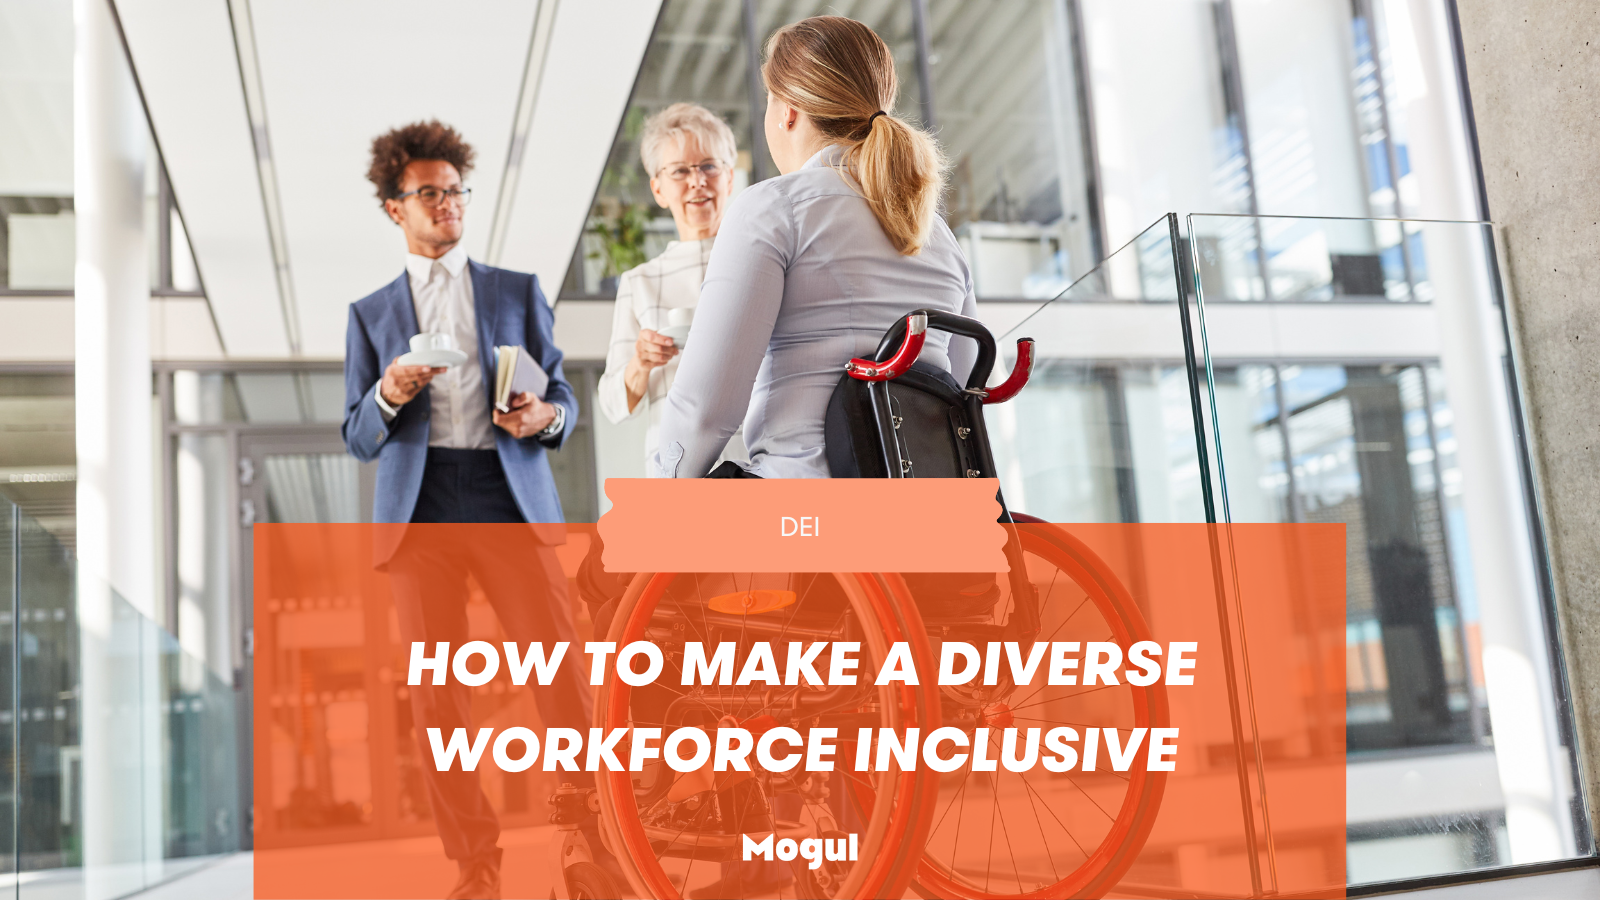 DEIB Best Practices 2023: How to Make a Diverse Workforce Inclusive